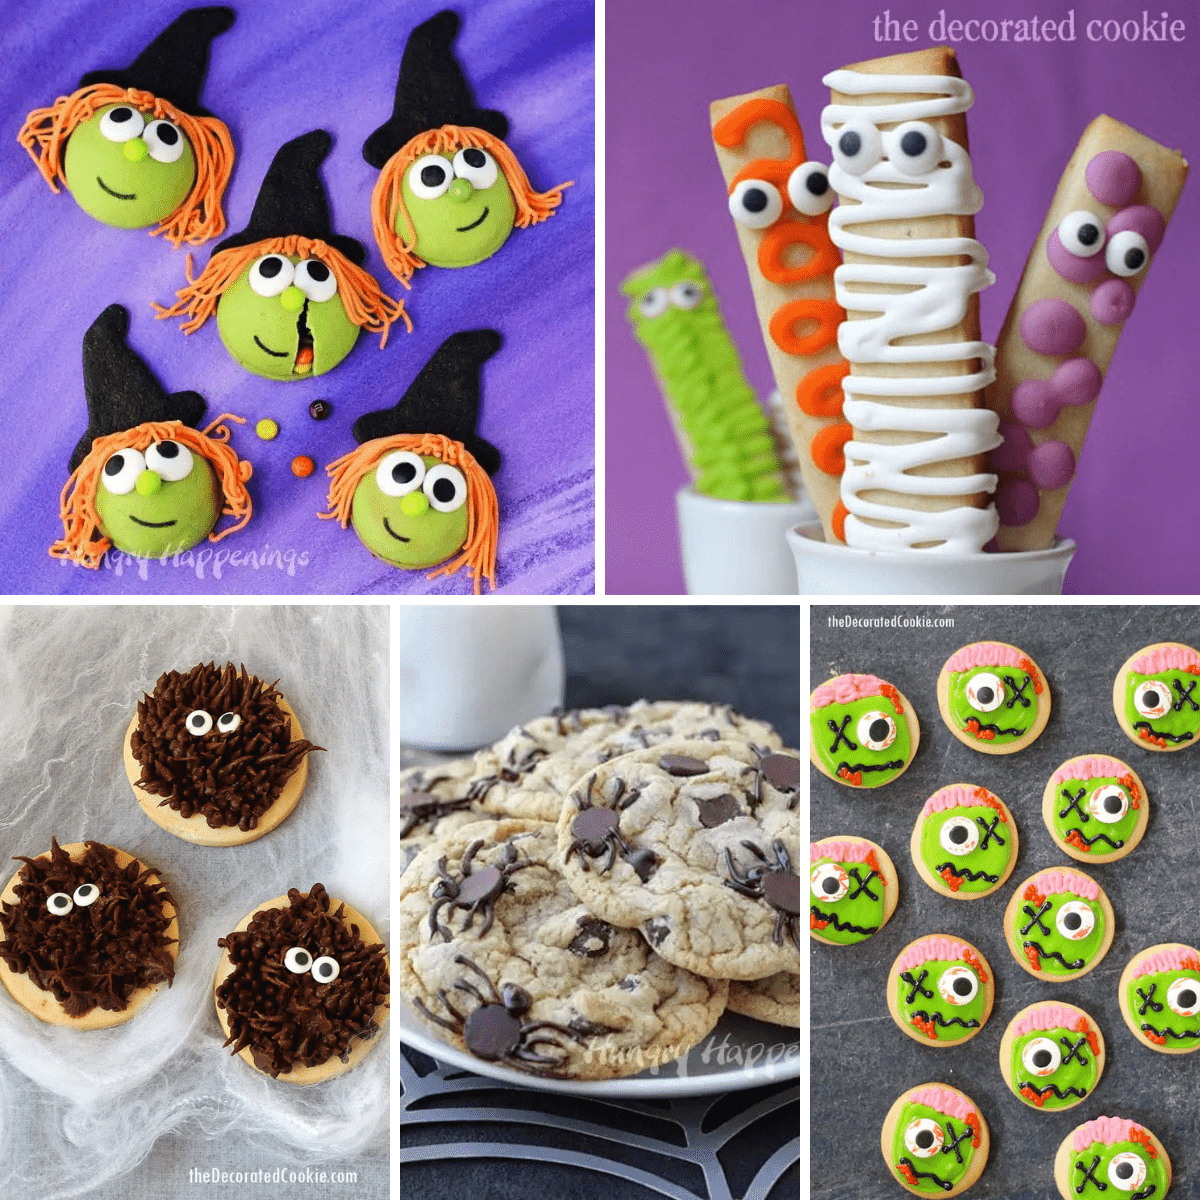 collage of decorated Halloween cookie ideas